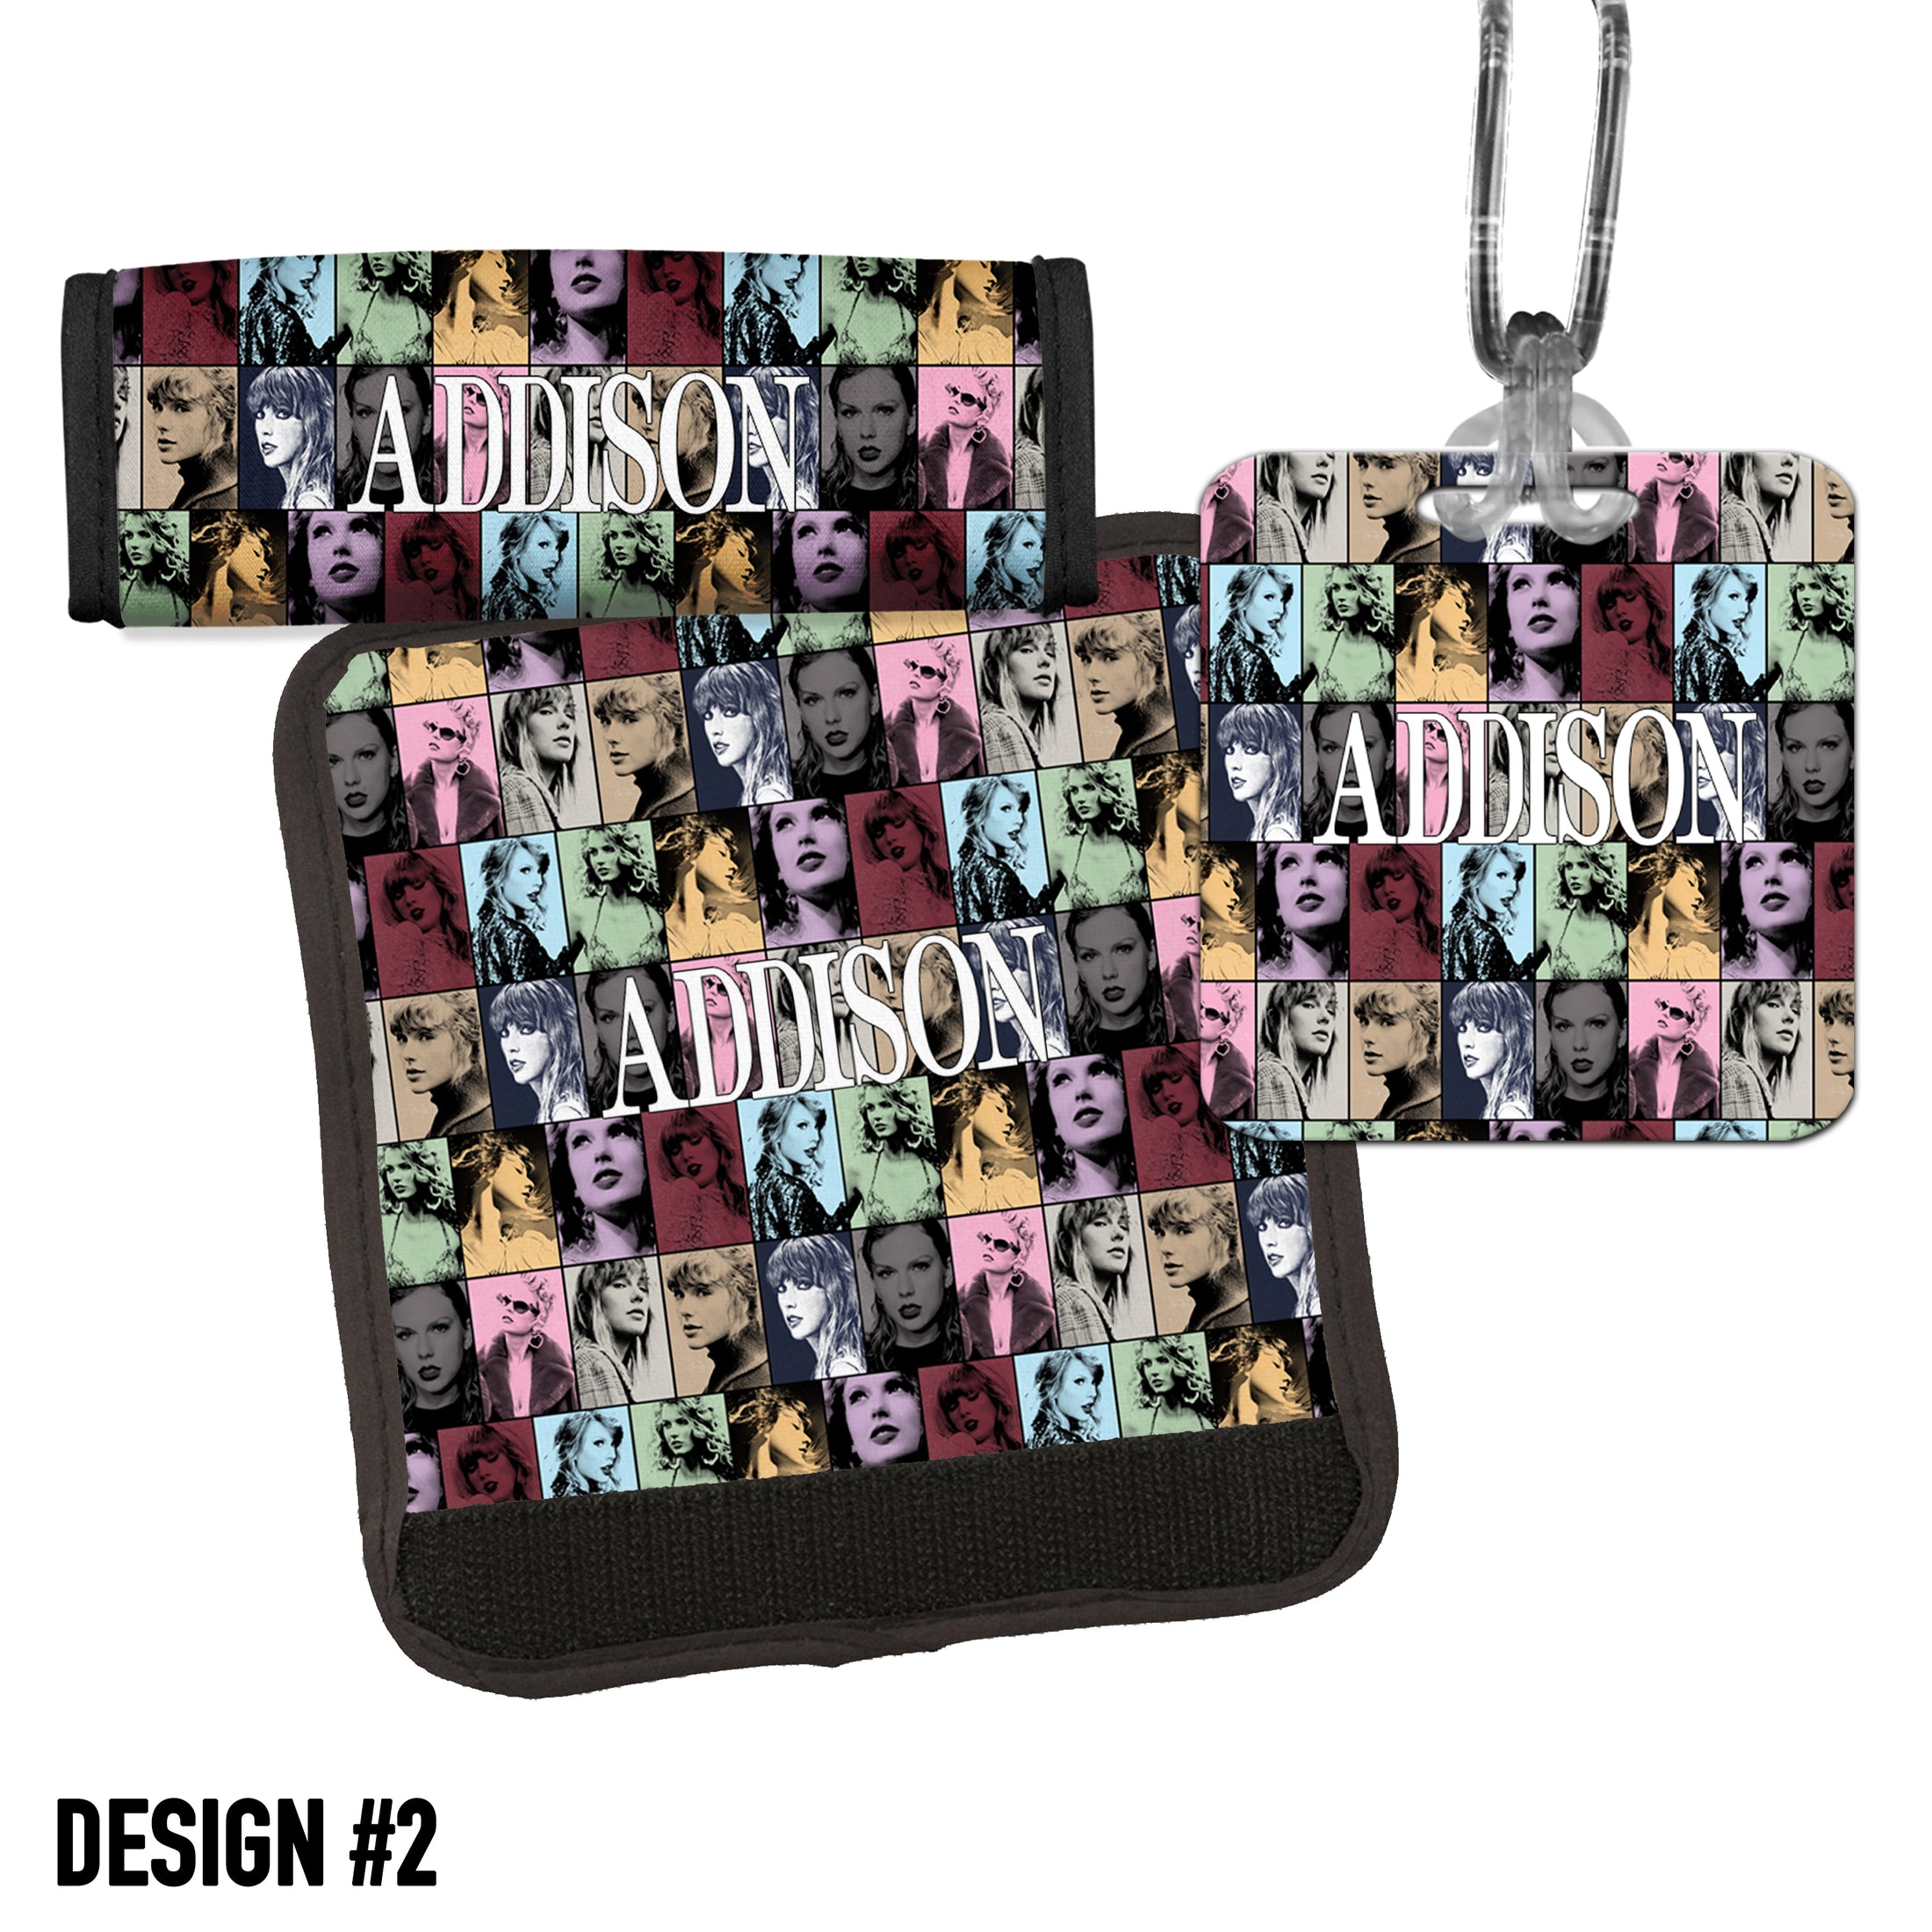 Personalized Taylor Swift Inspired Eras Tour Luggage Tag and Wrap Set